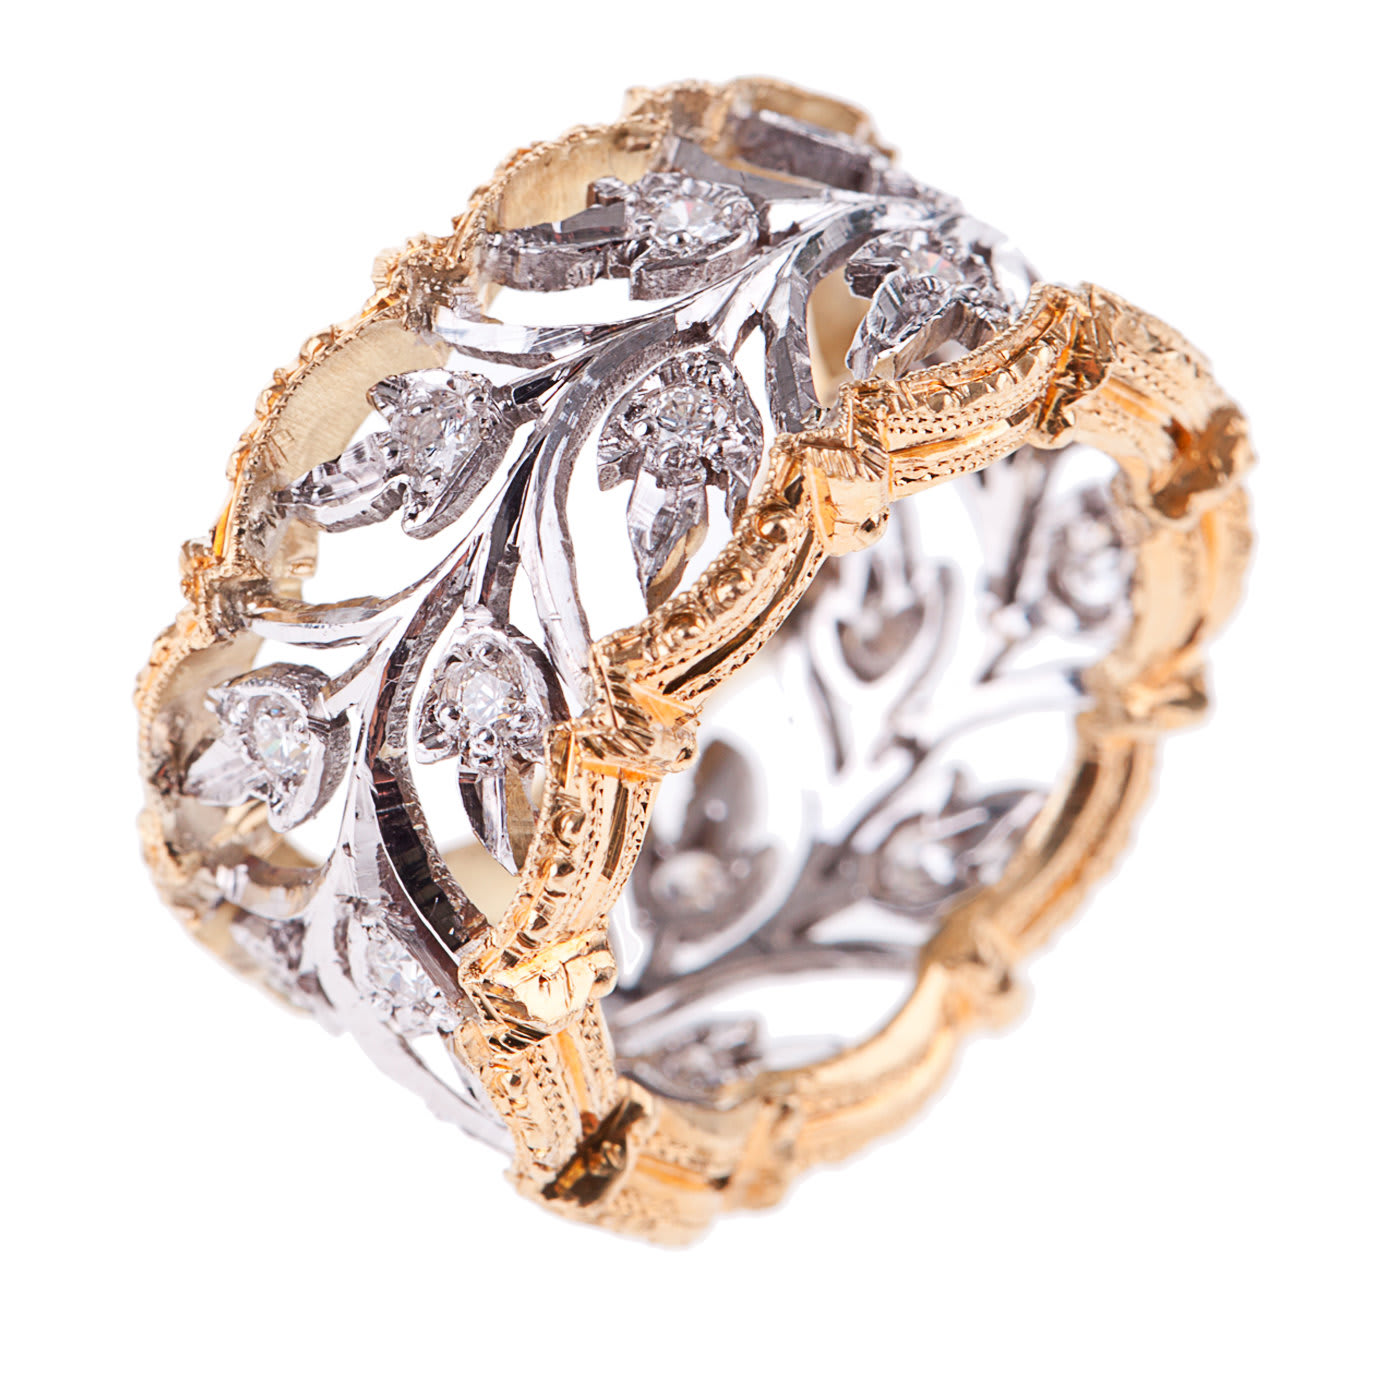 Lily Gold and Diamonds Ring - Marco Baroni